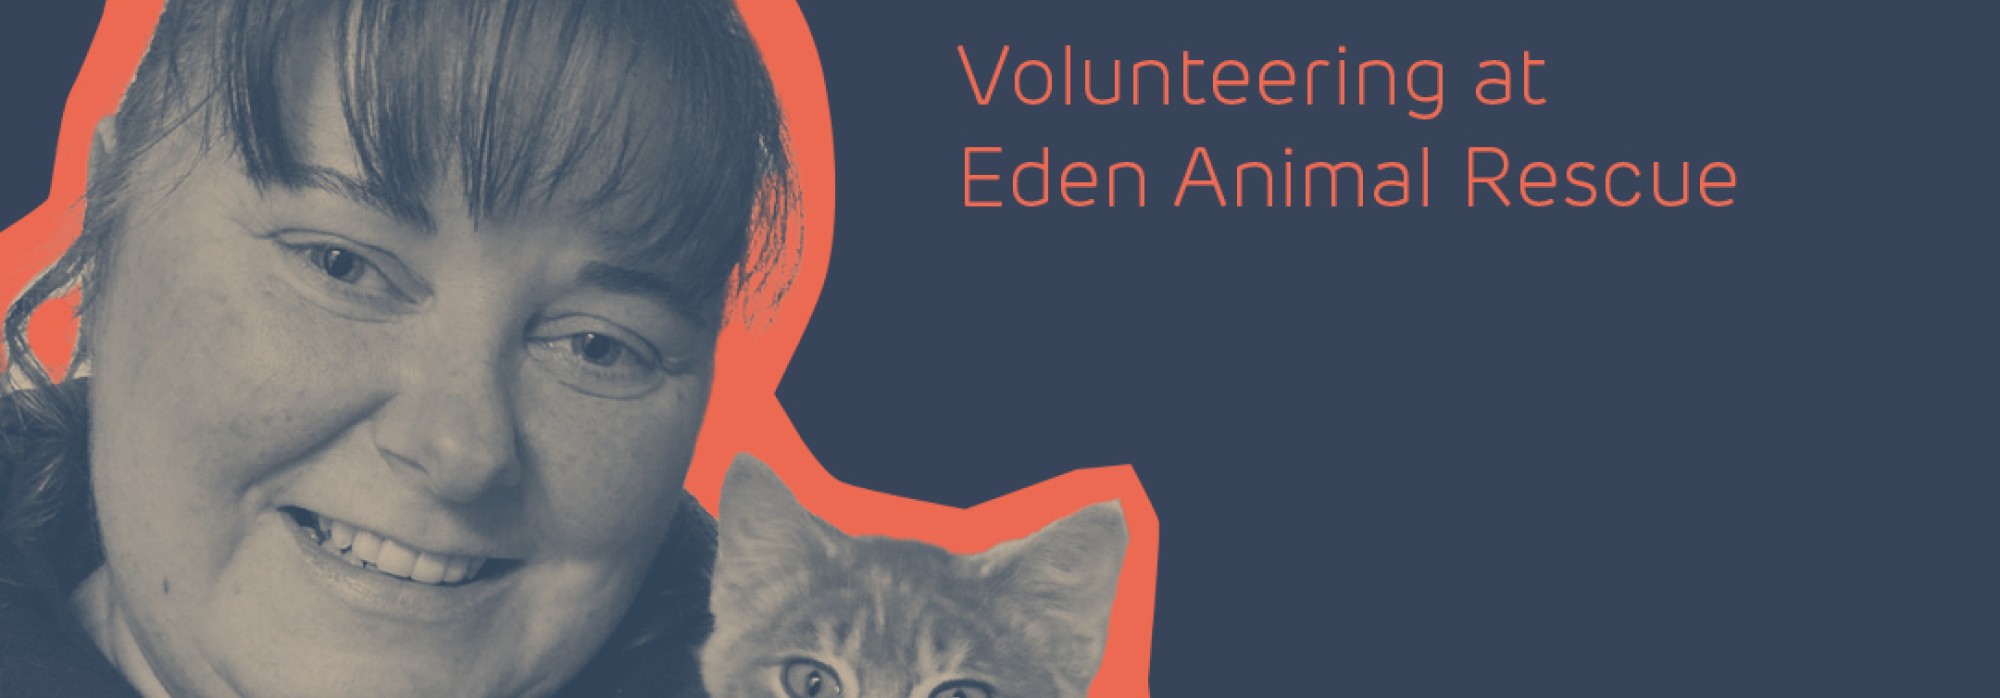 Dawn's charity day, volunteering at Eden Animal Rescue